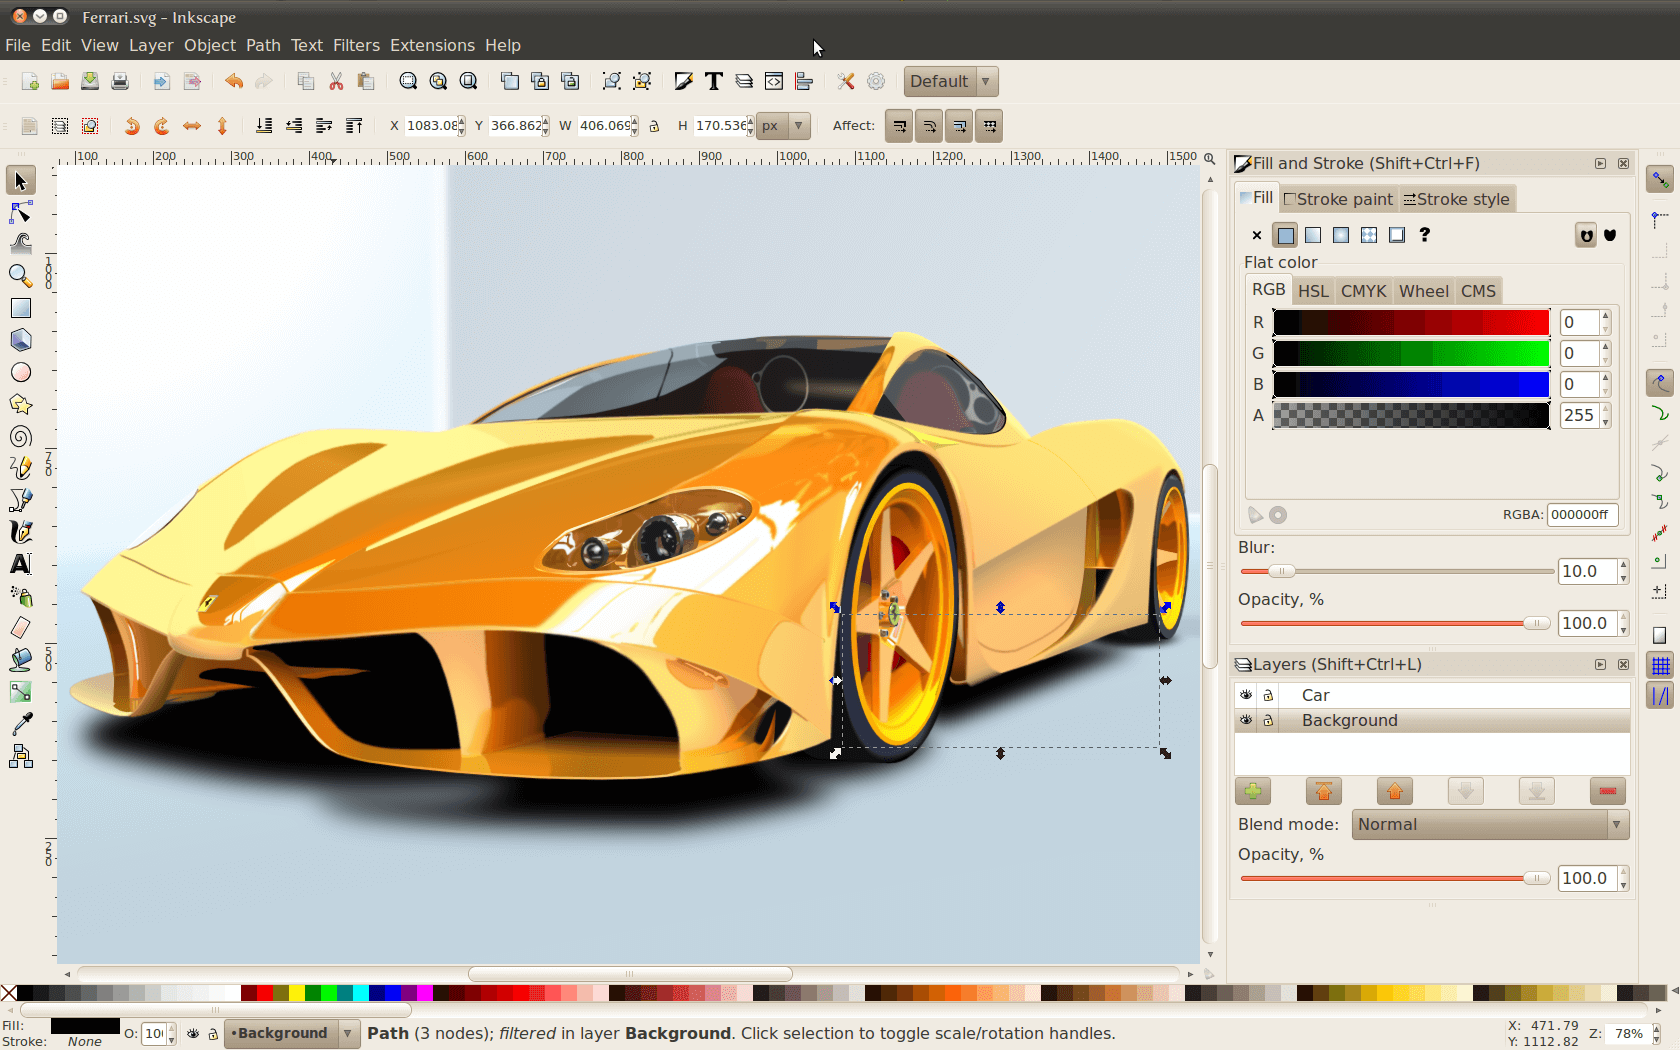 3d car graphic design software free download